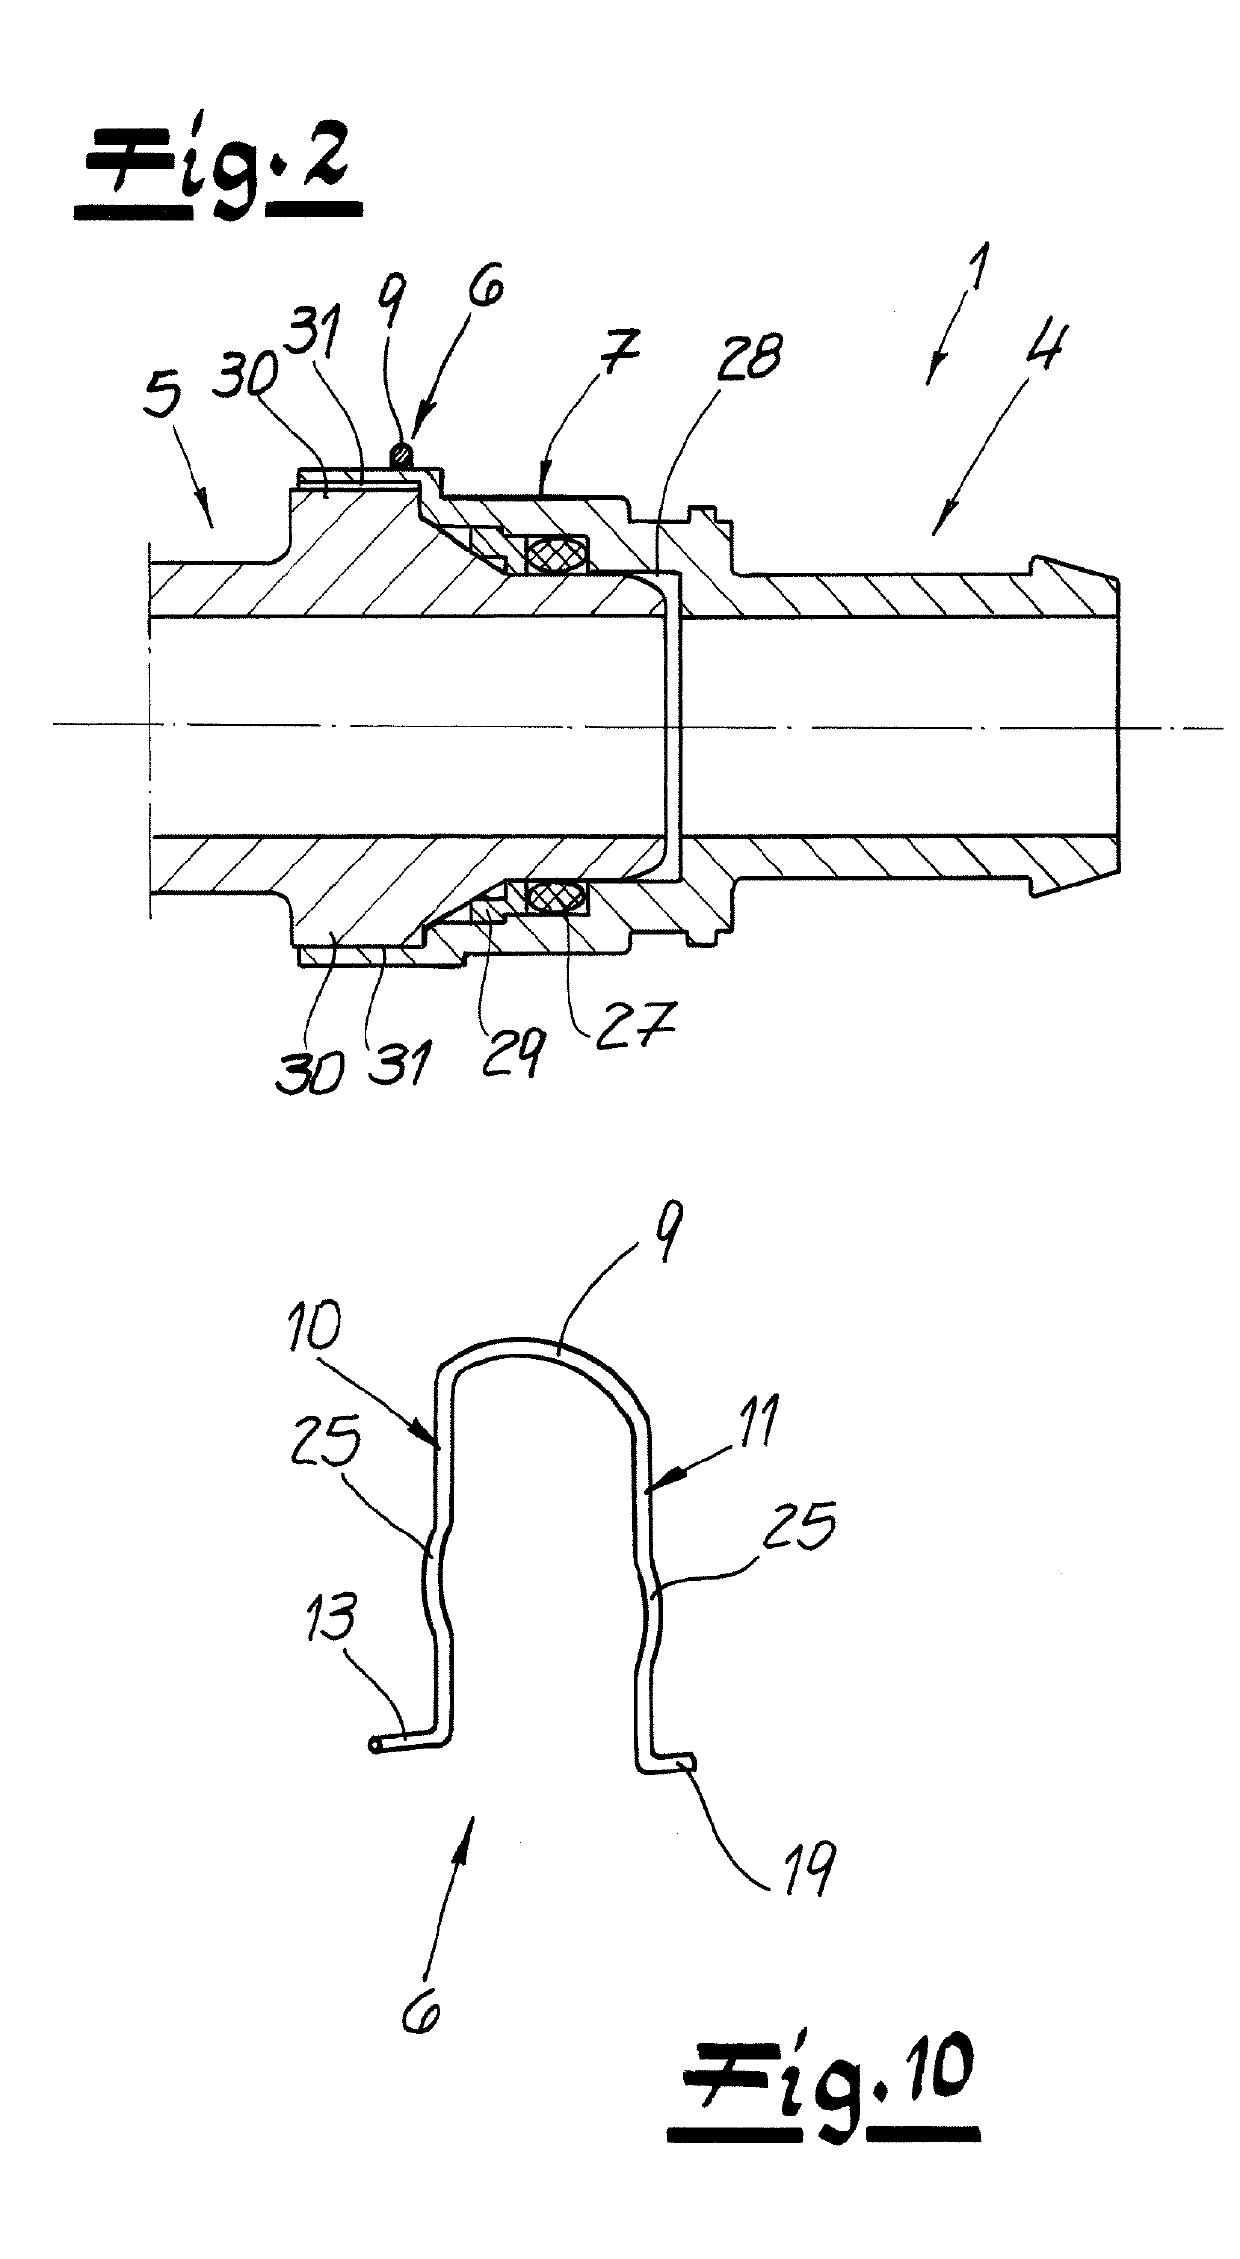 Connector for connection between two fluid-conveying elements